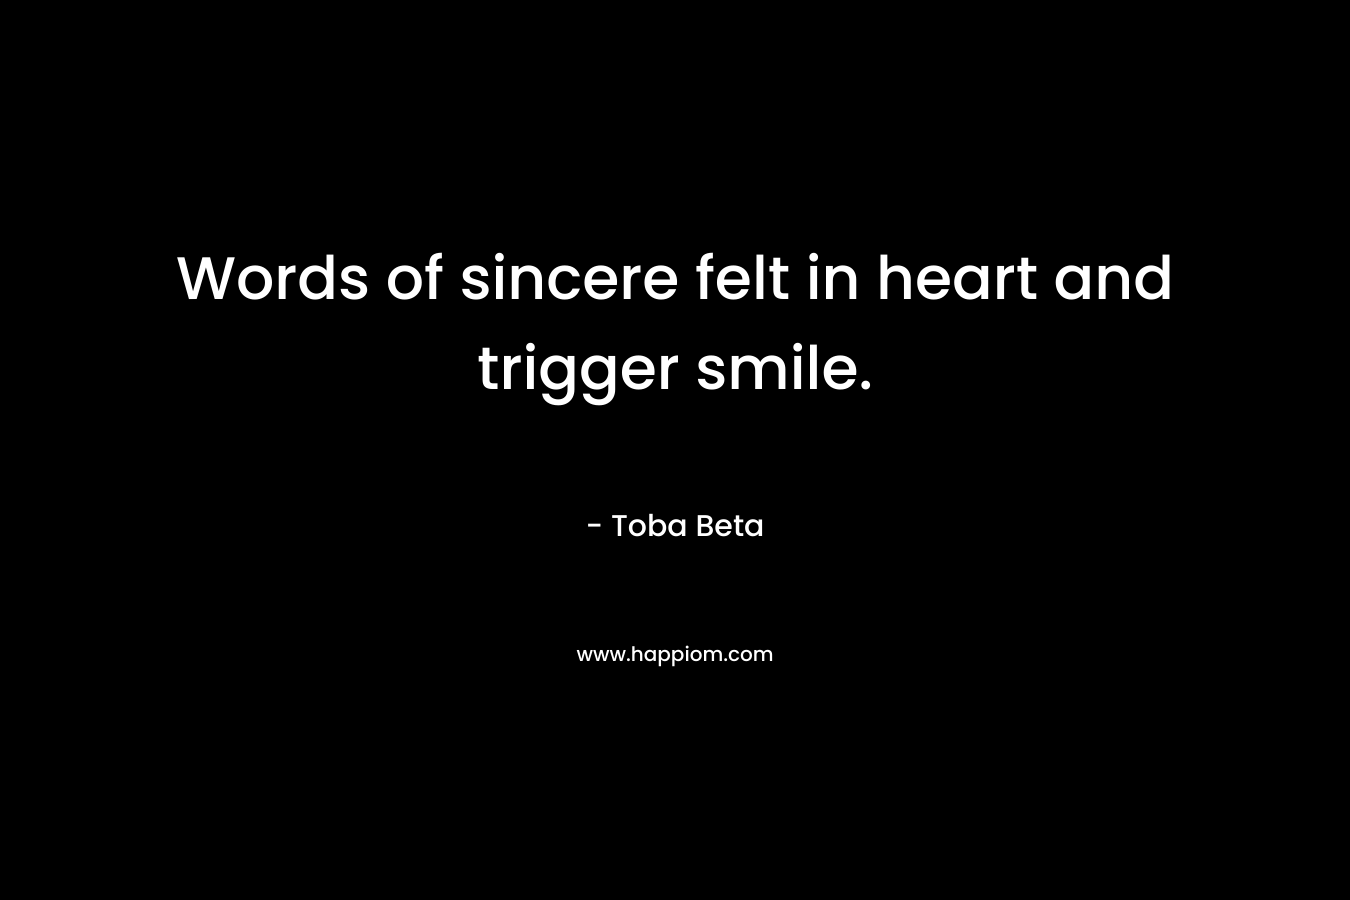 Words of sincere felt in heart and trigger smile.